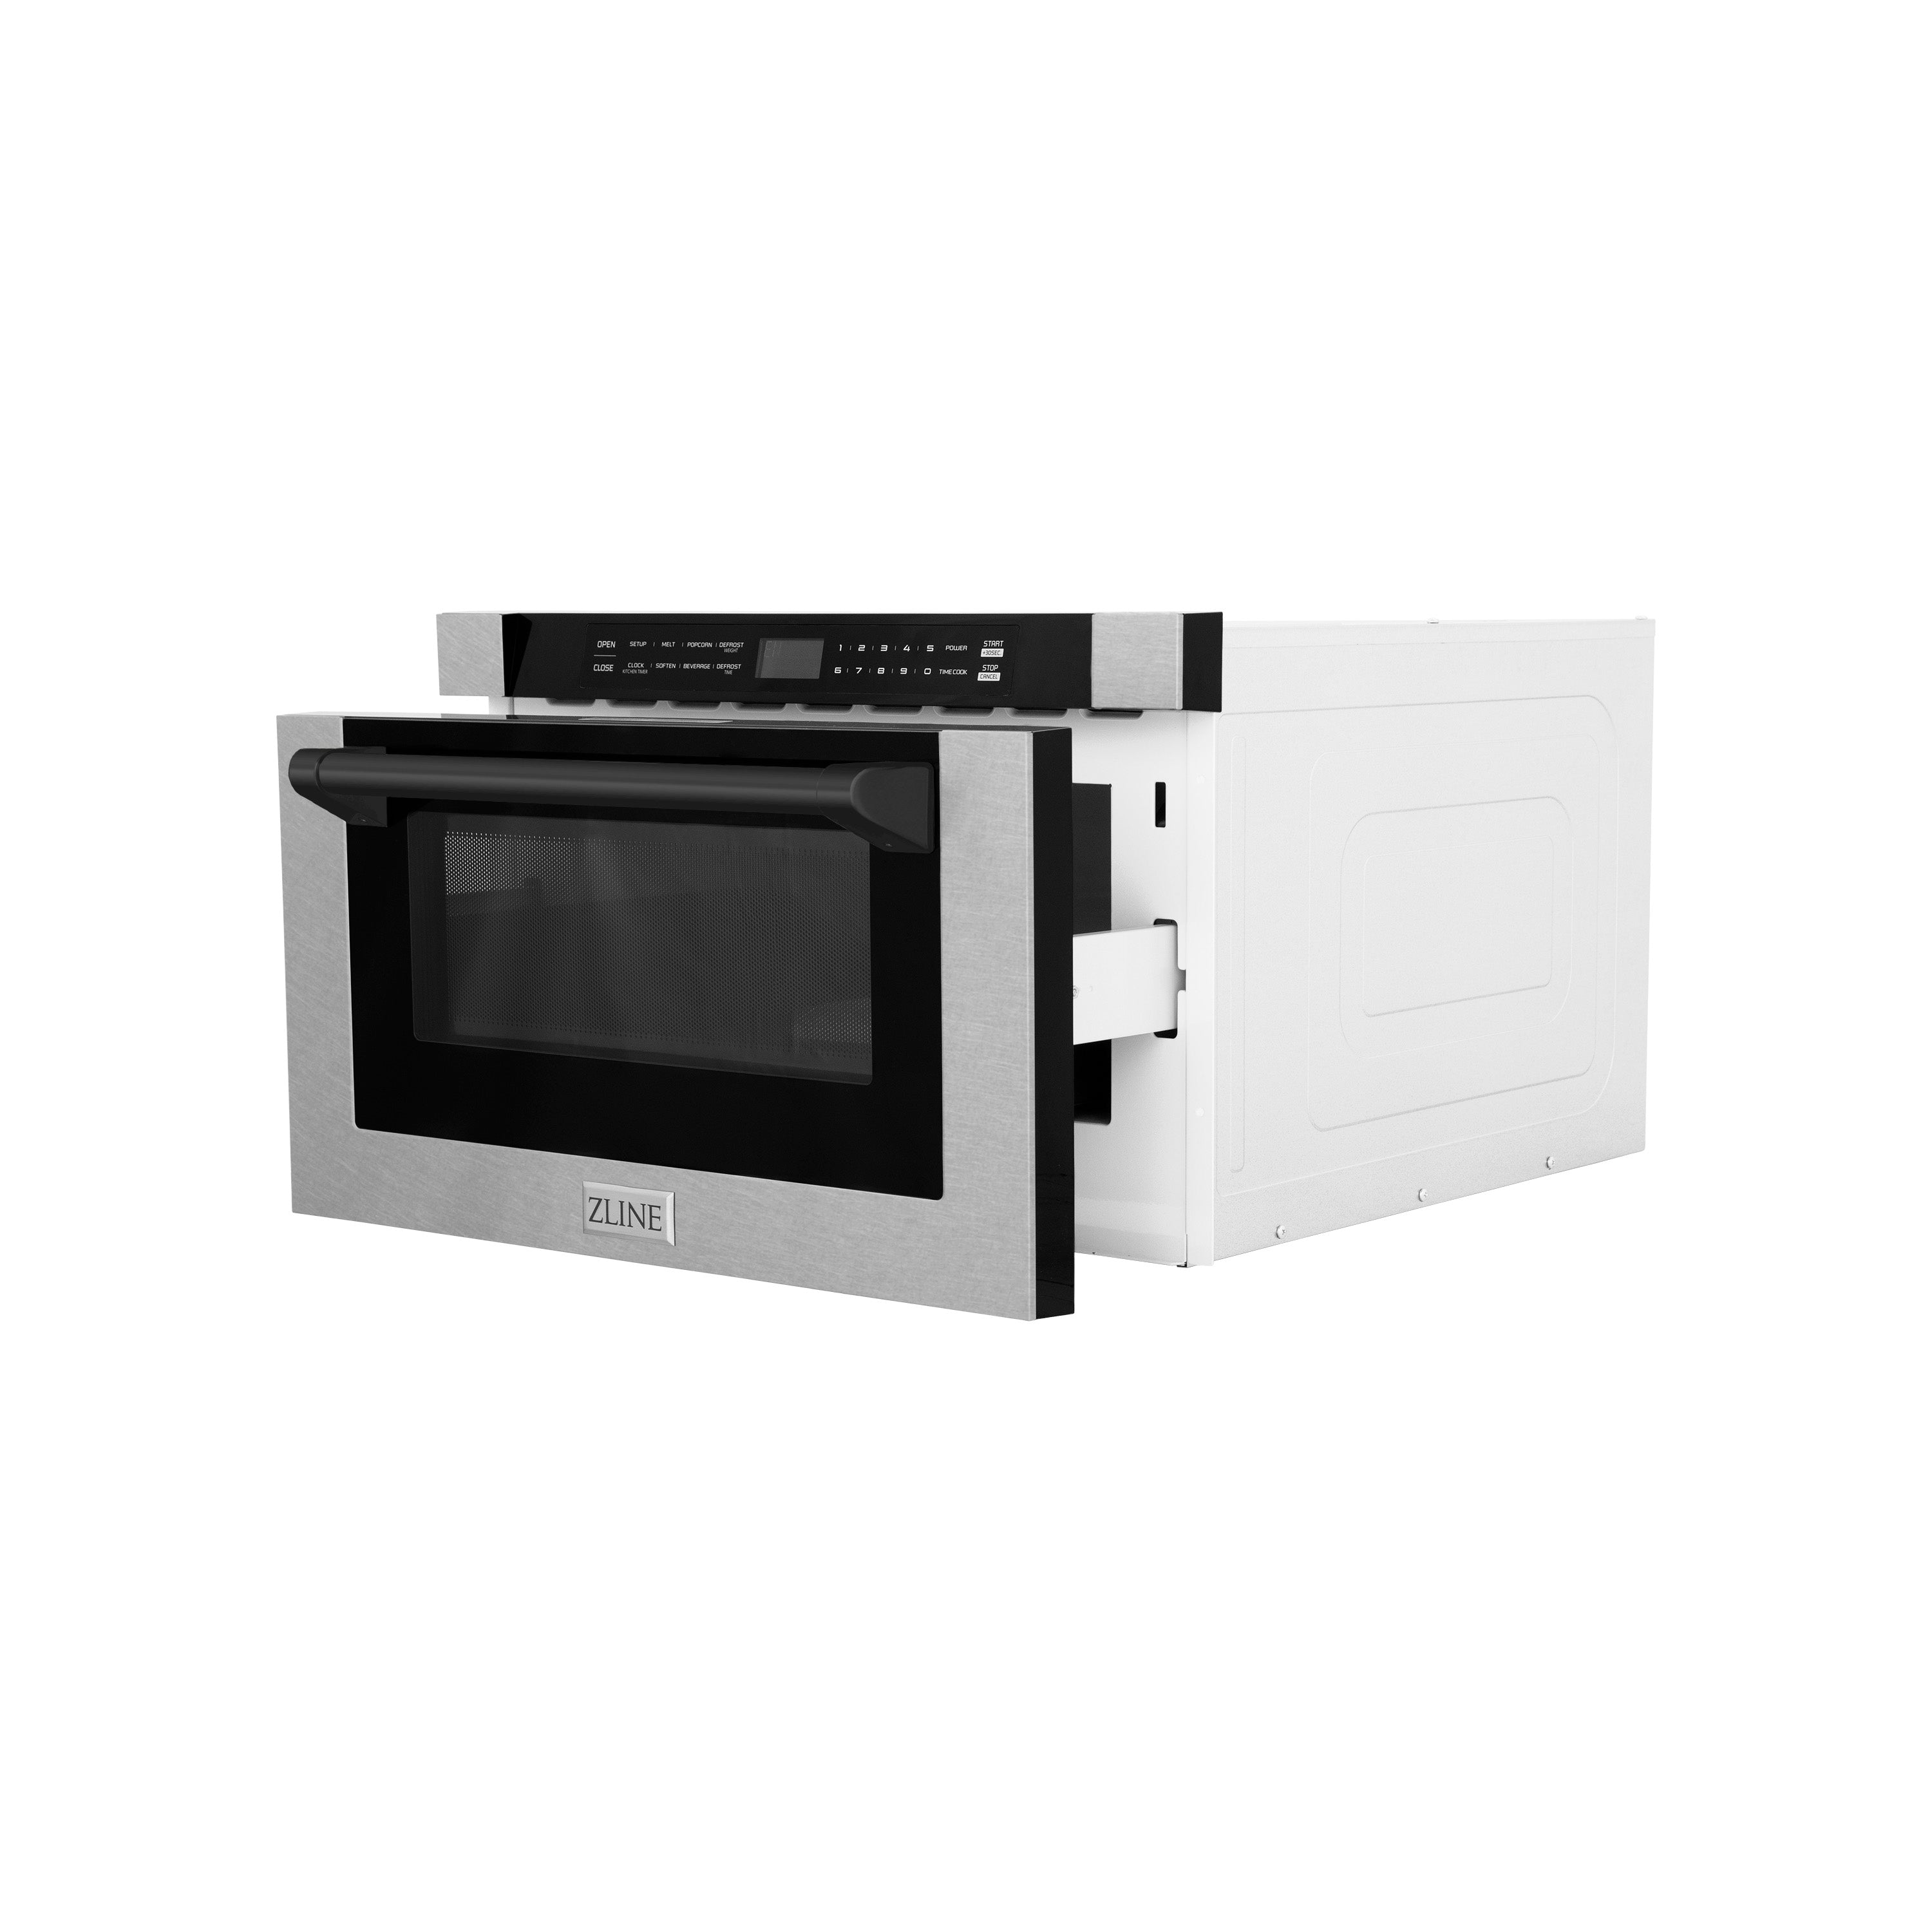 ZLINE Autograph Edition 24" 1.2 cu. ft. Built-in Microwave Drawer with a Traditional Handle in Fingerprint Resistant Stainless Steel and Matte Black Accents